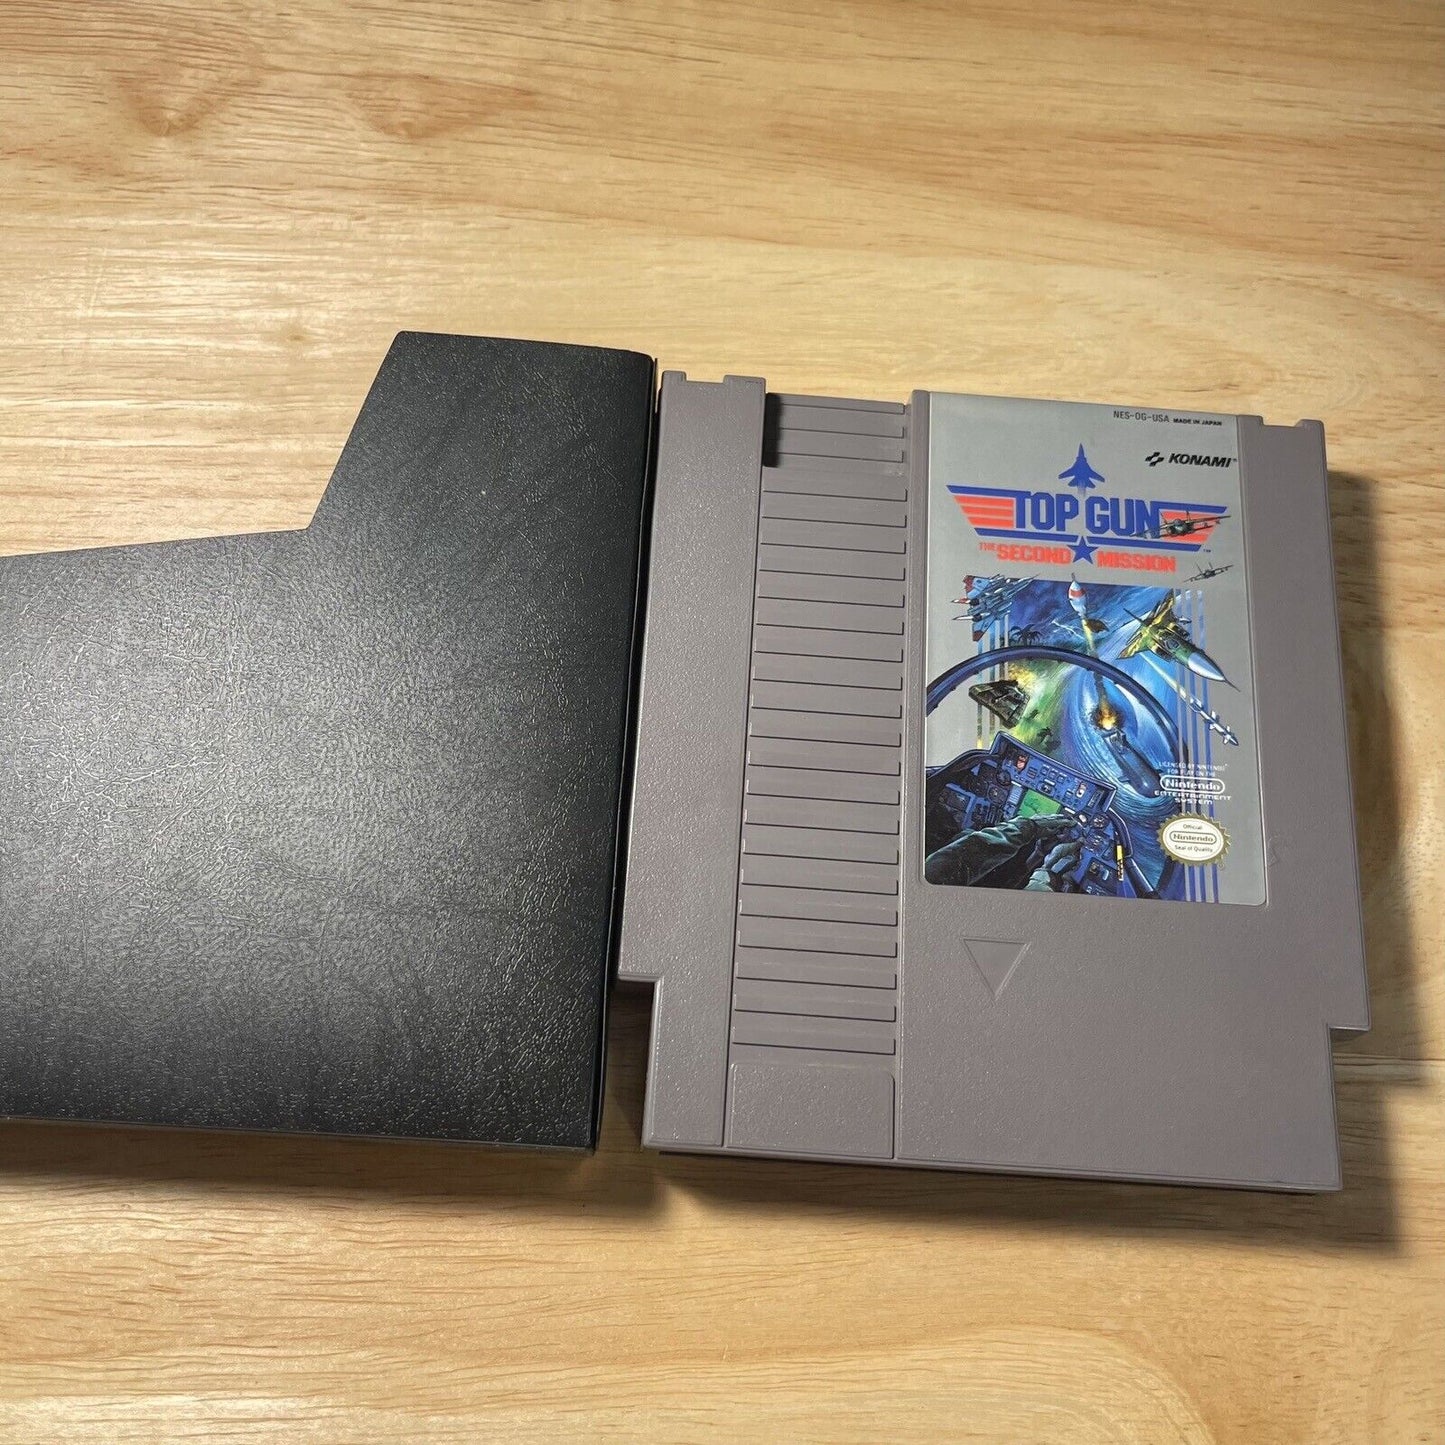 Top Gun 2 - The Second Mission ORIGINAL Nintendo NES GAME Tested + Working!